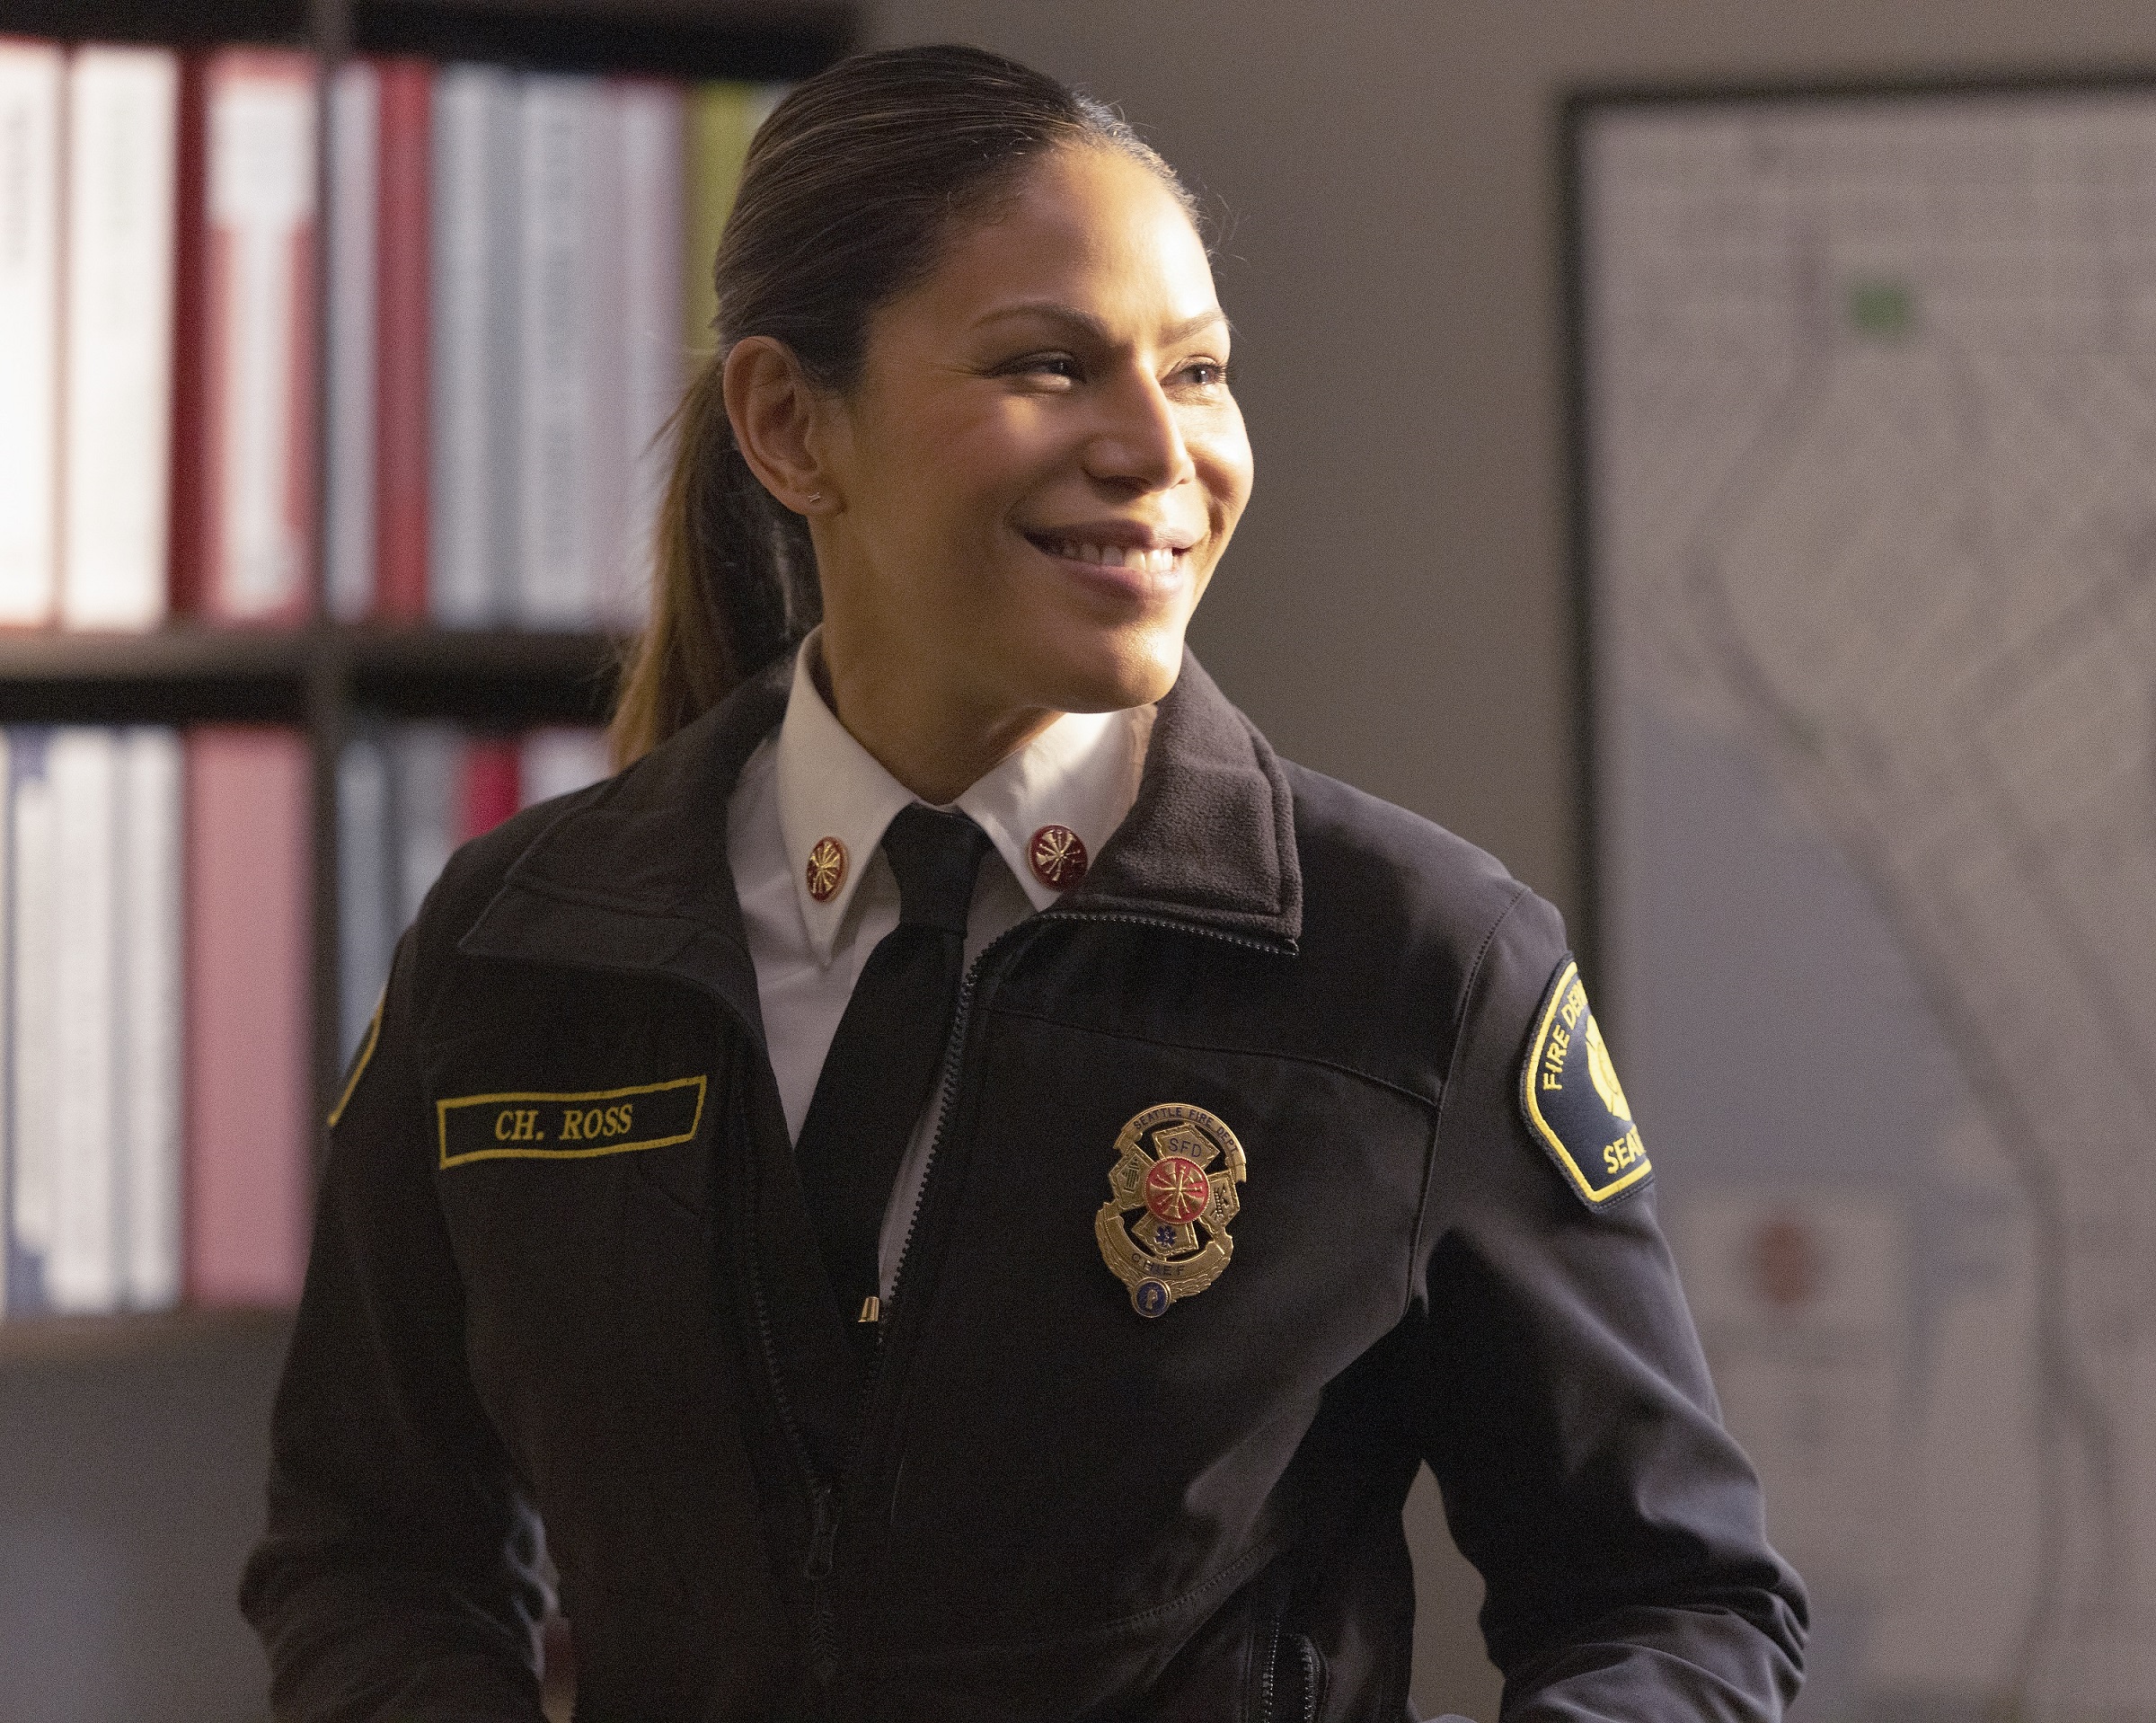 'Station 19' Season 5 Episode 9 guest star Merle Dandridge smiling as the new fire chief